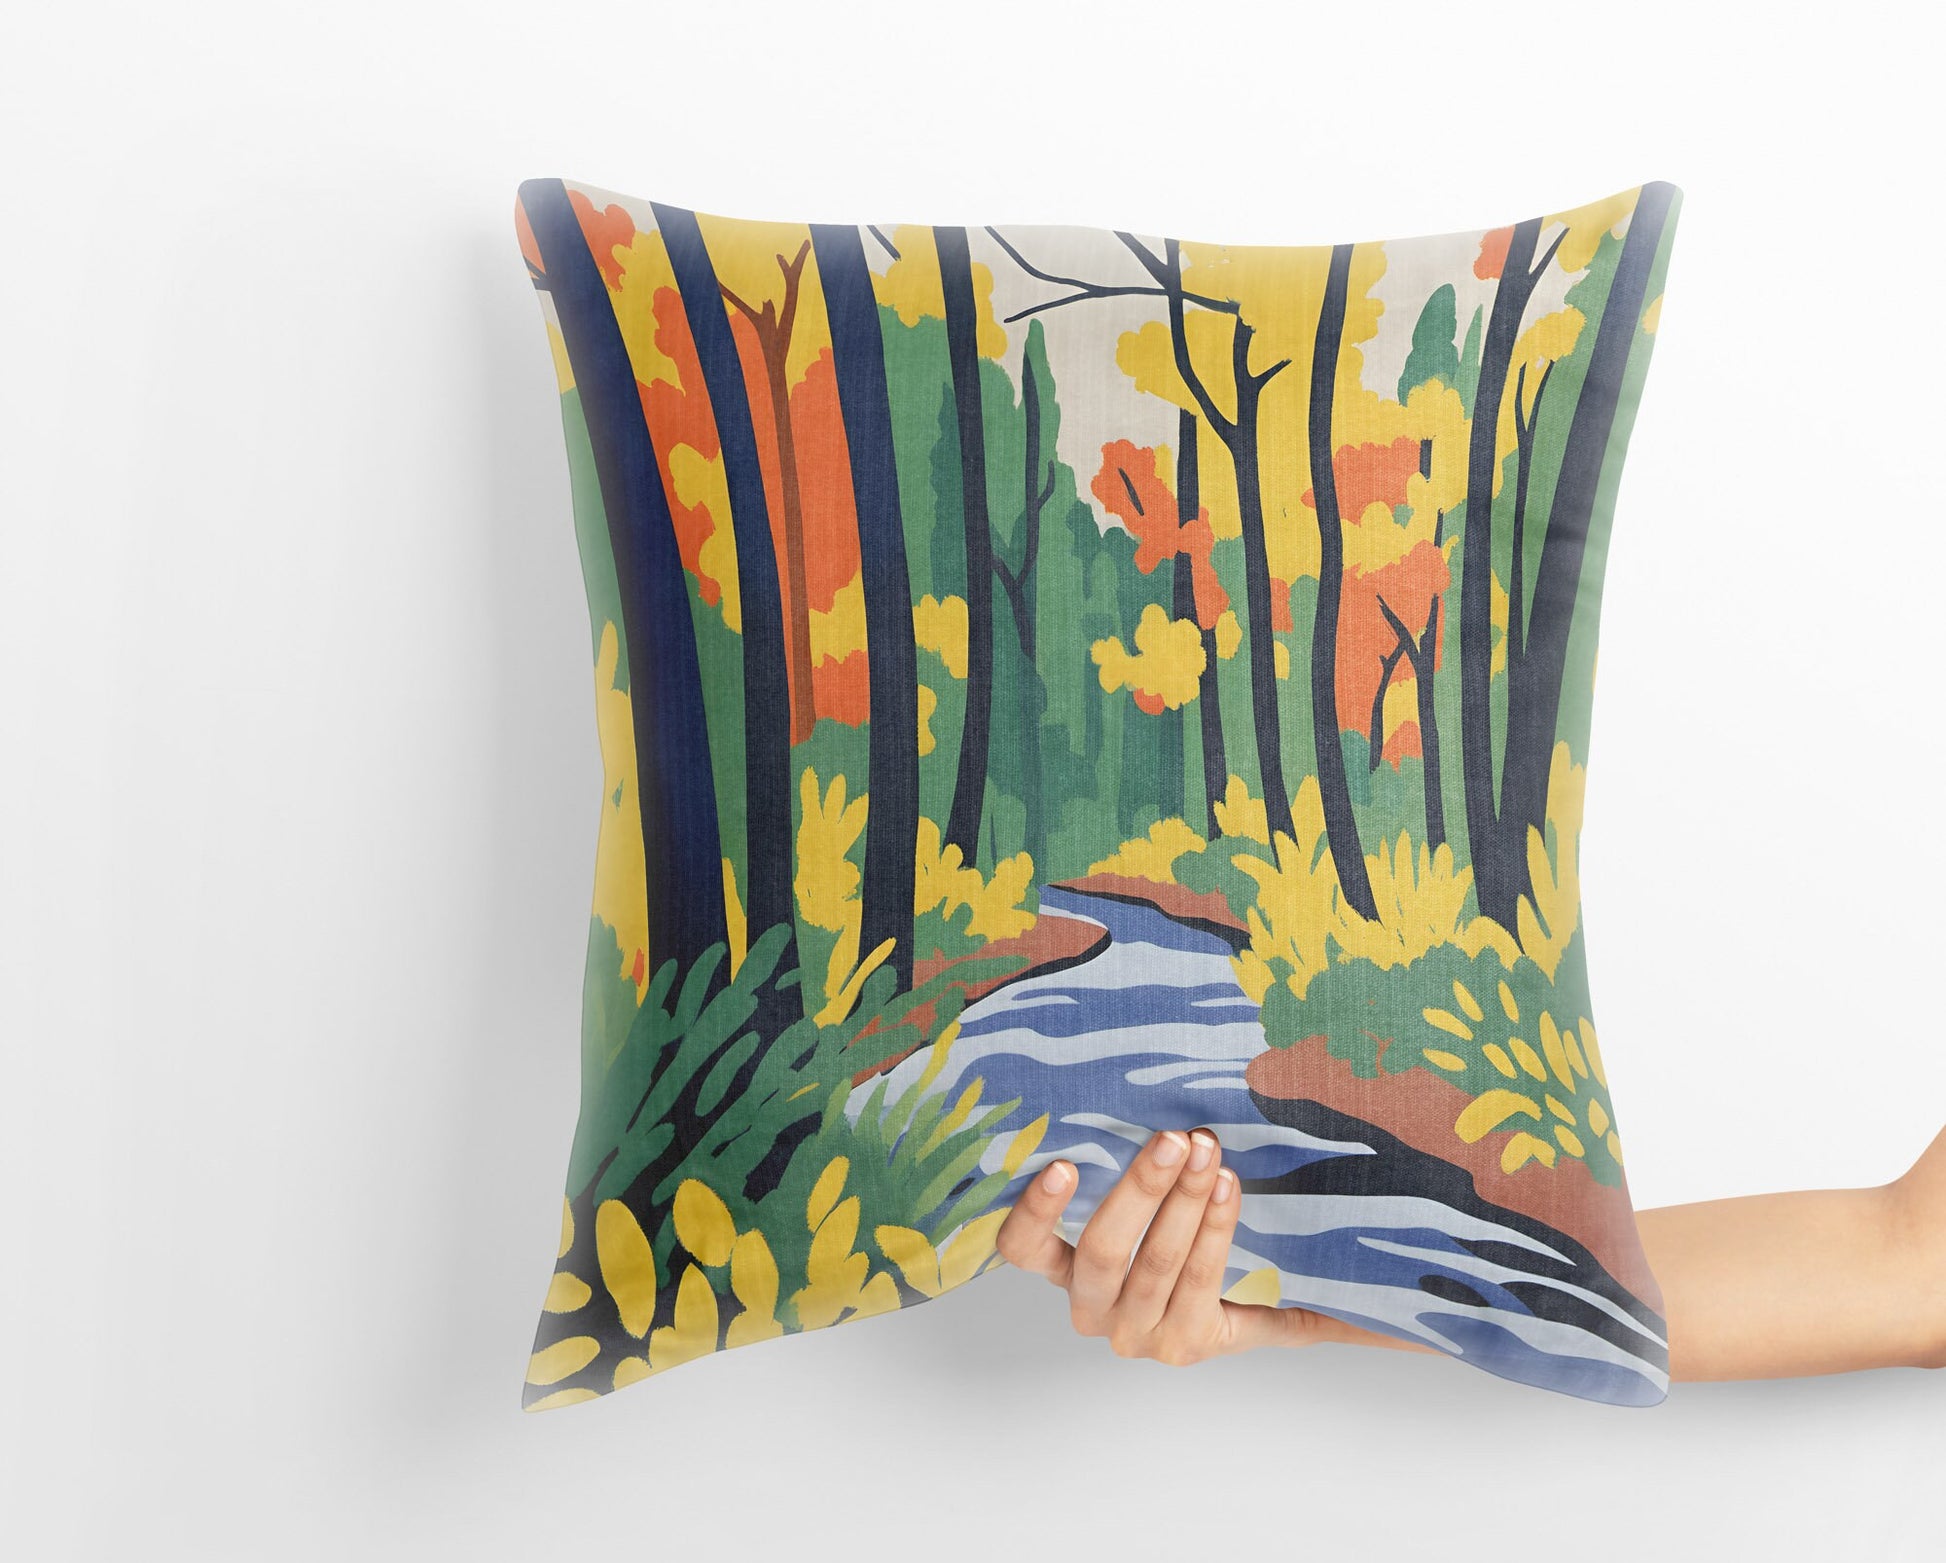 Cuyahoga Valley National Park Throw Pillow Cover, Usa Travel Pillow, Soft Pillow Cases, Colorful Pillow Case, Fashion, 16X16 Case